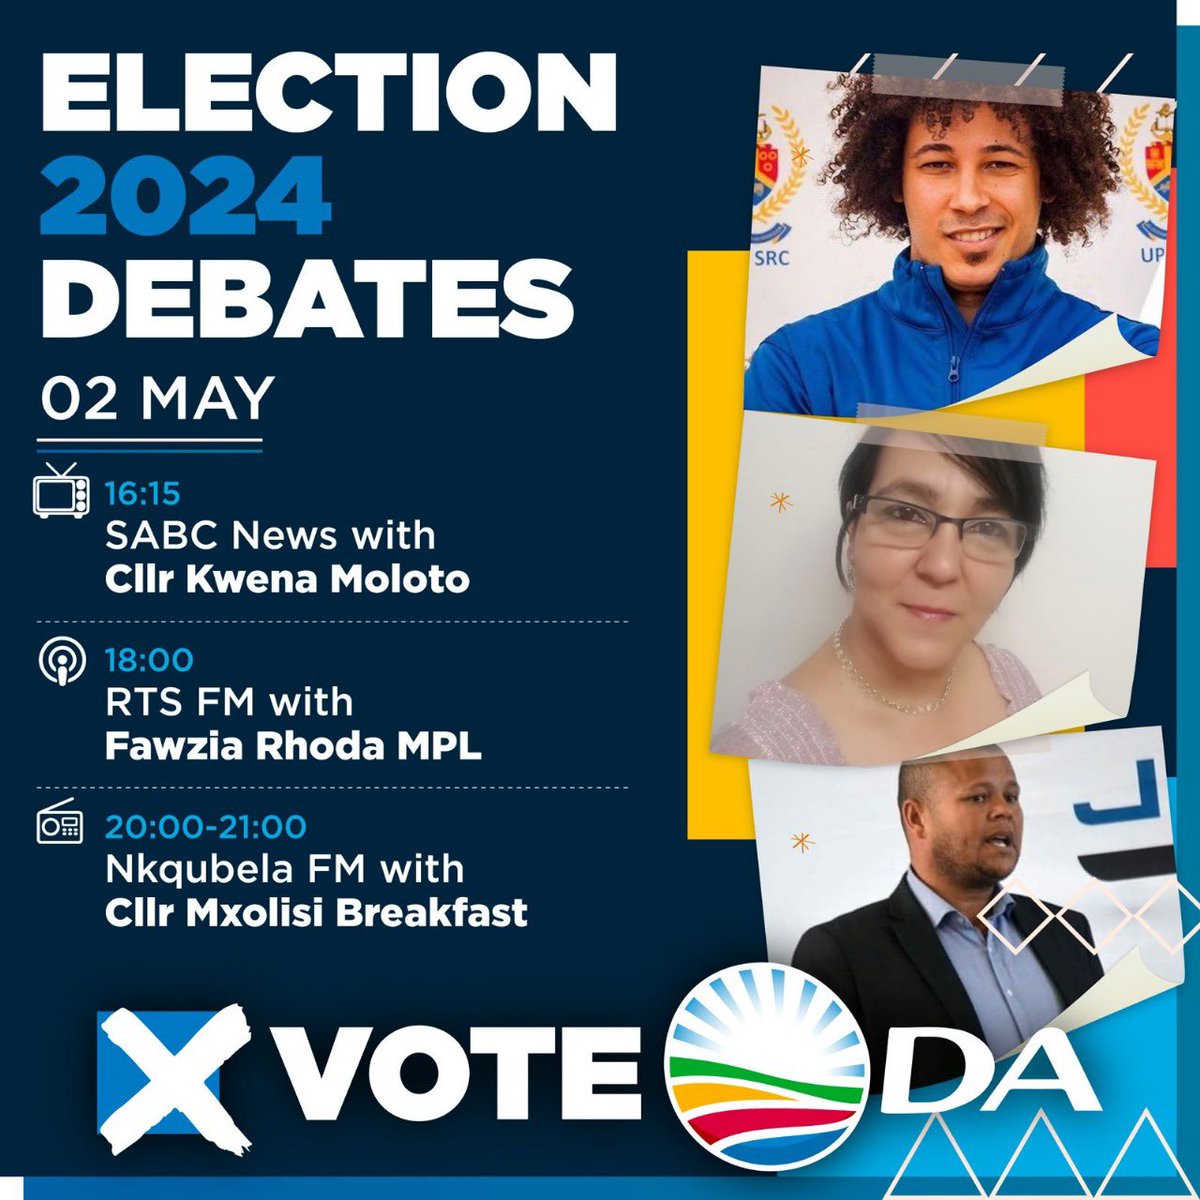 📺Tune in to SABC News and radio stations to catch our DA leaders live in the Election 2024 Debates. You do not want to miss out on the conversations. 

#RescueSA